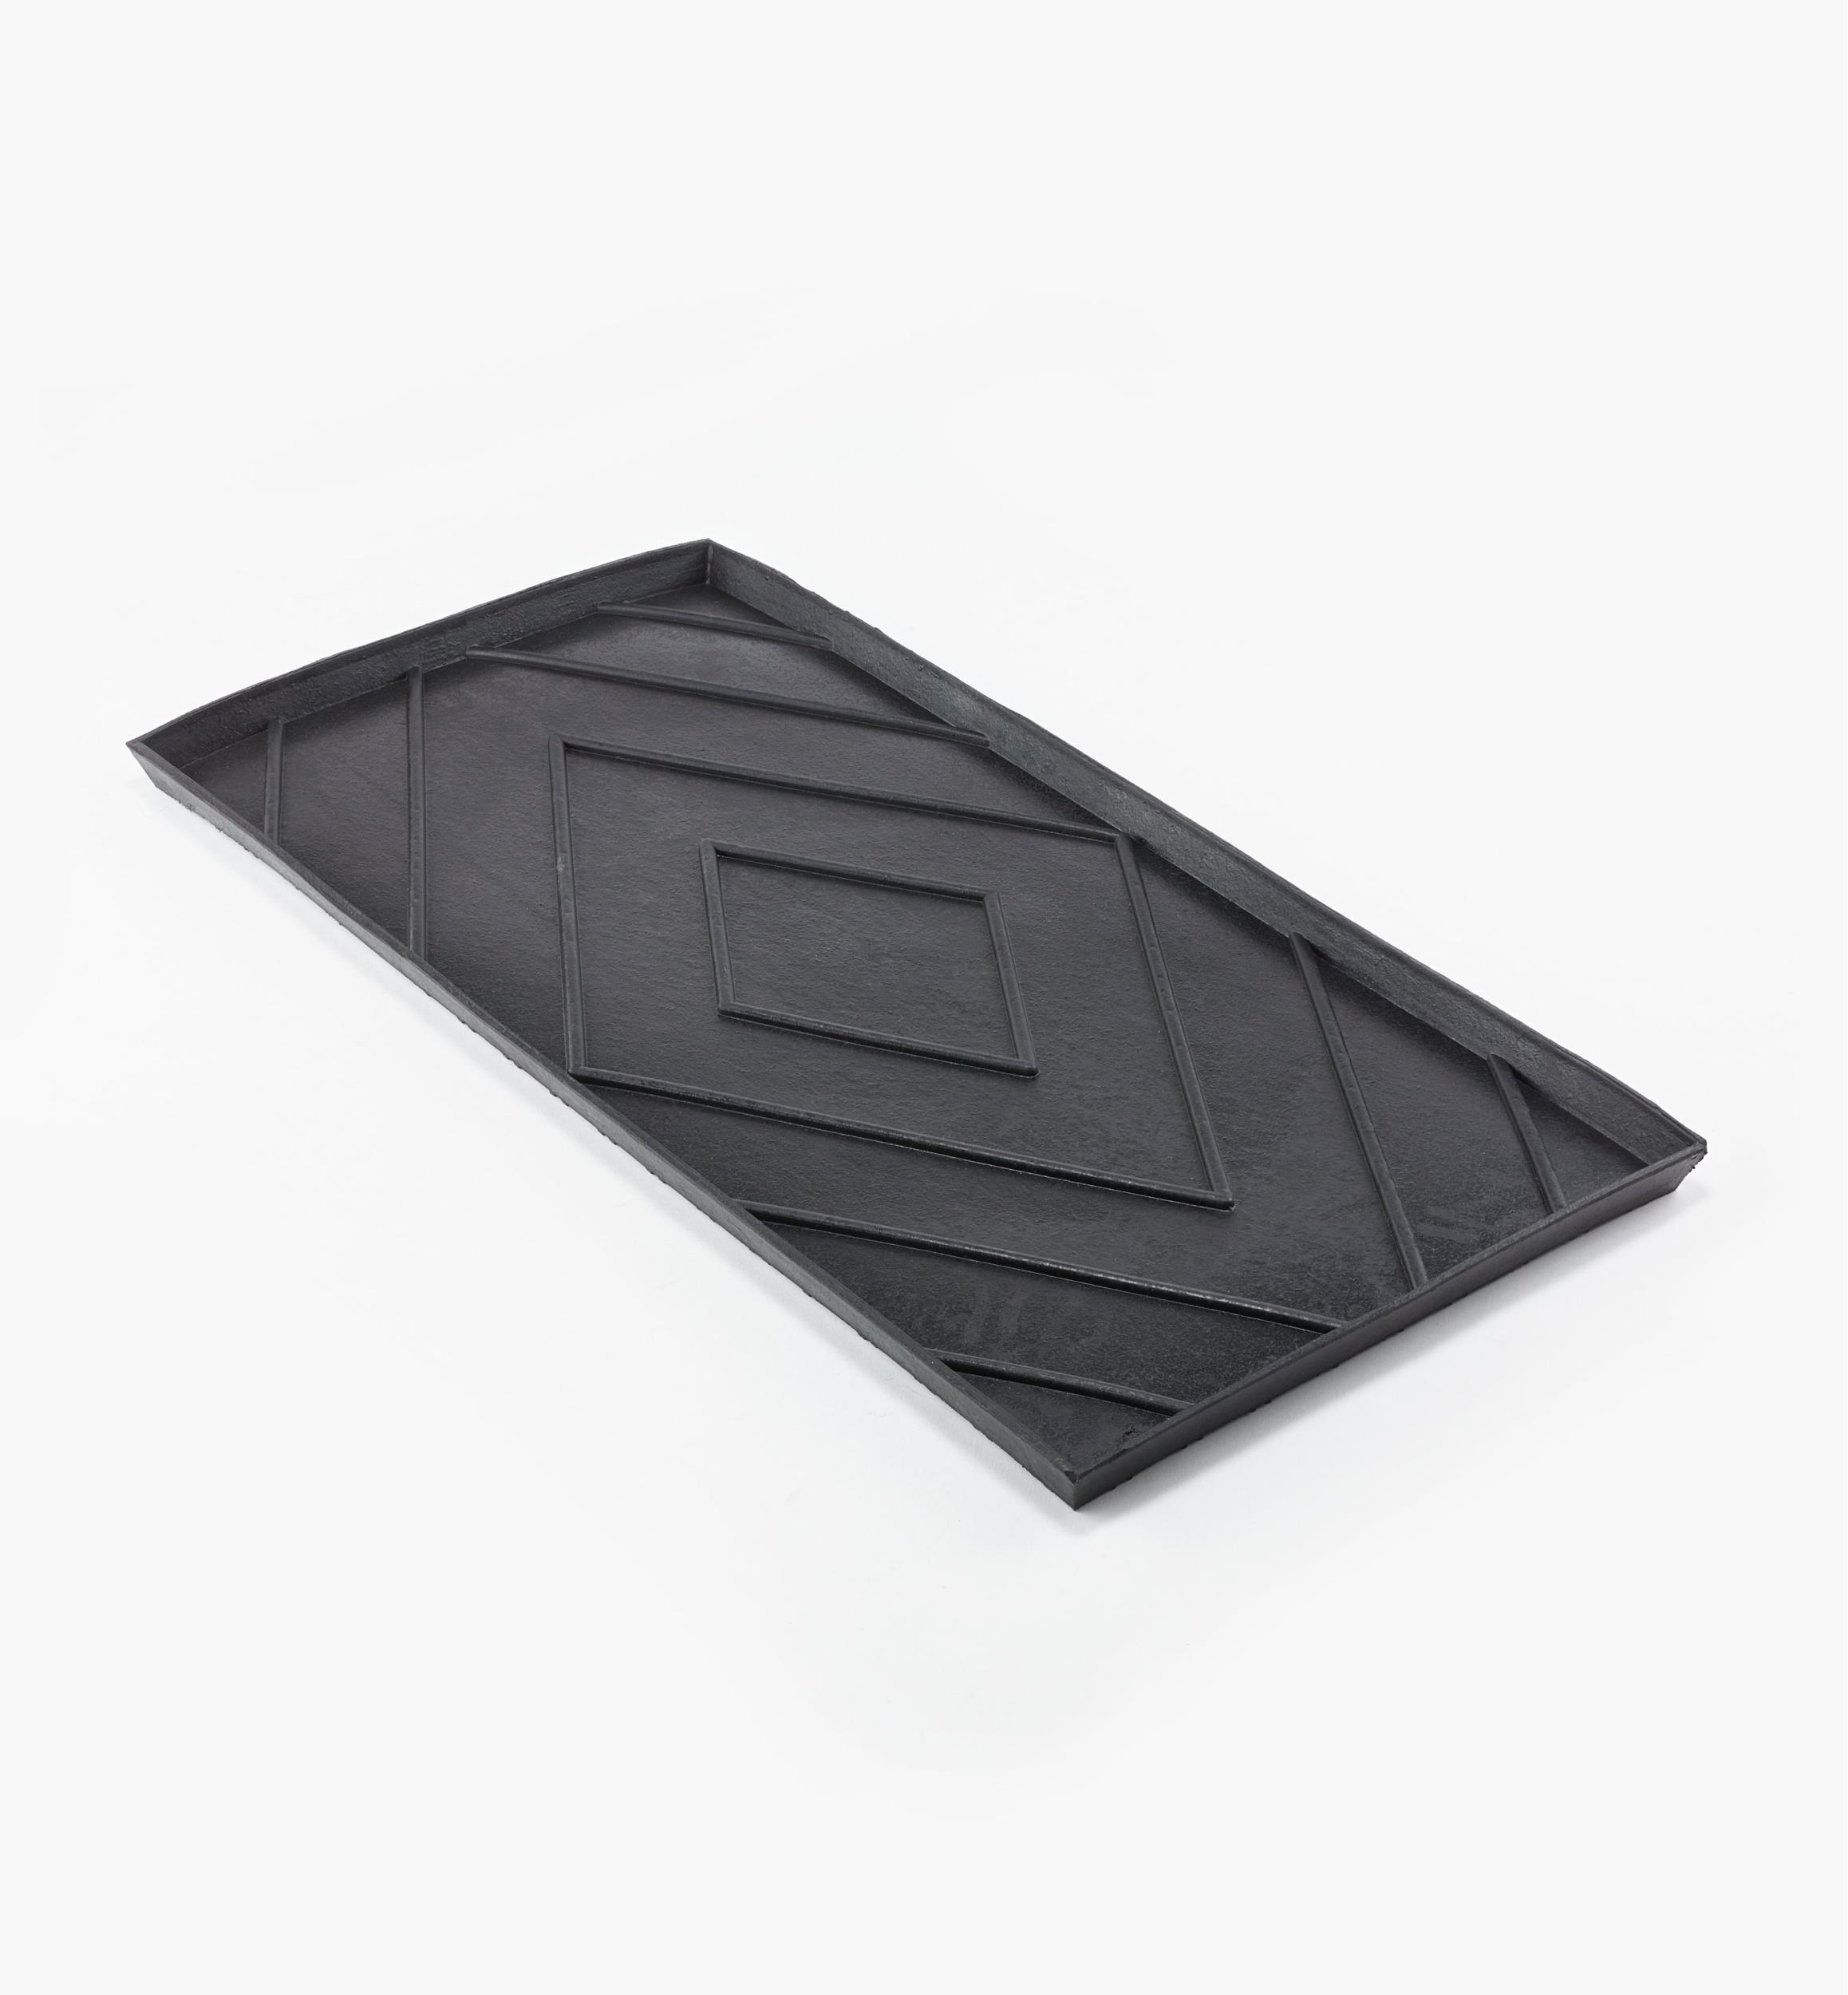 https://assets.leevalley.com/Size5/10036/HB110-rubber-boot-tray-f-61.jpg